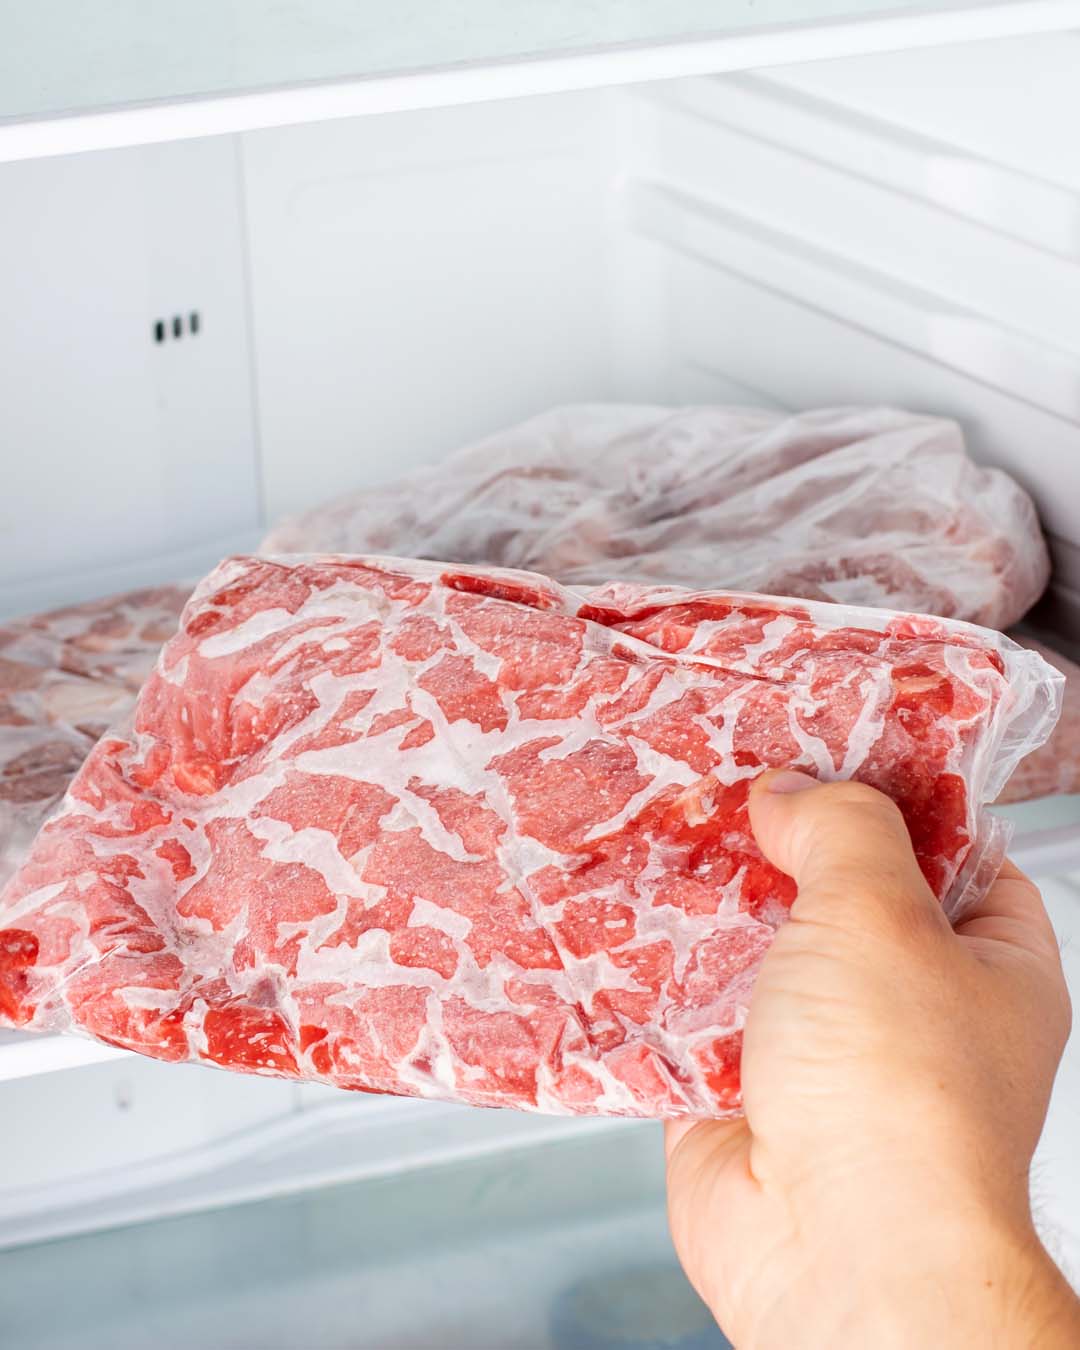 Meat Bag 200x300mm 50microns 1kg Clear Freezer Bag 250pack